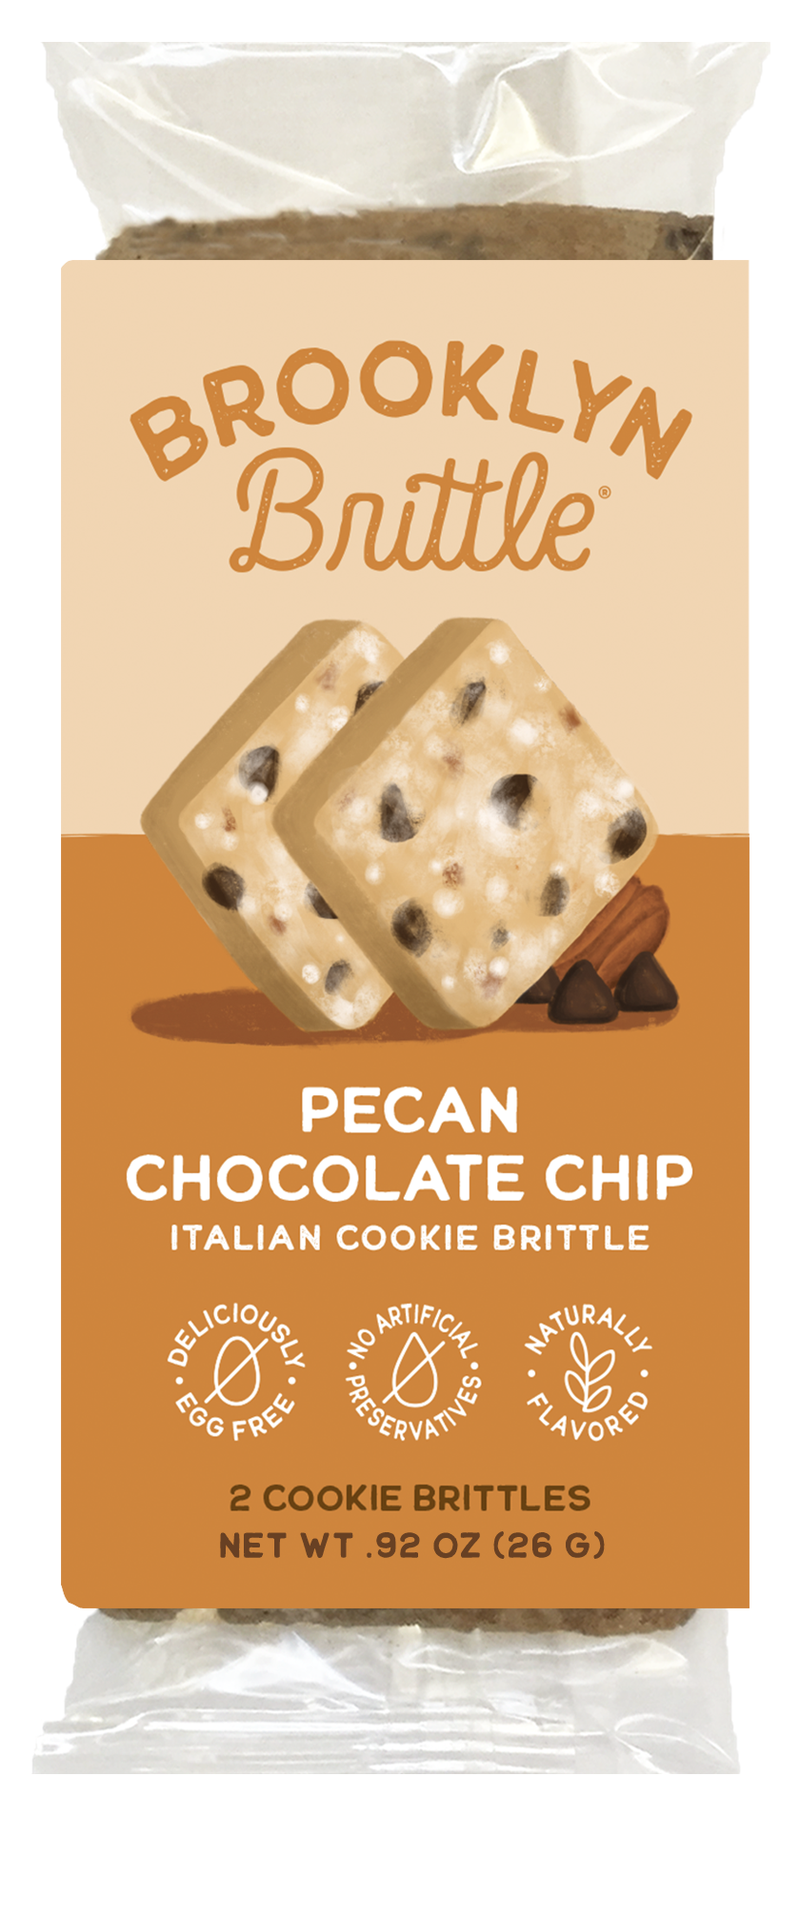 PECAN CHOCOLATE CHIP COOKIE BRITTLE